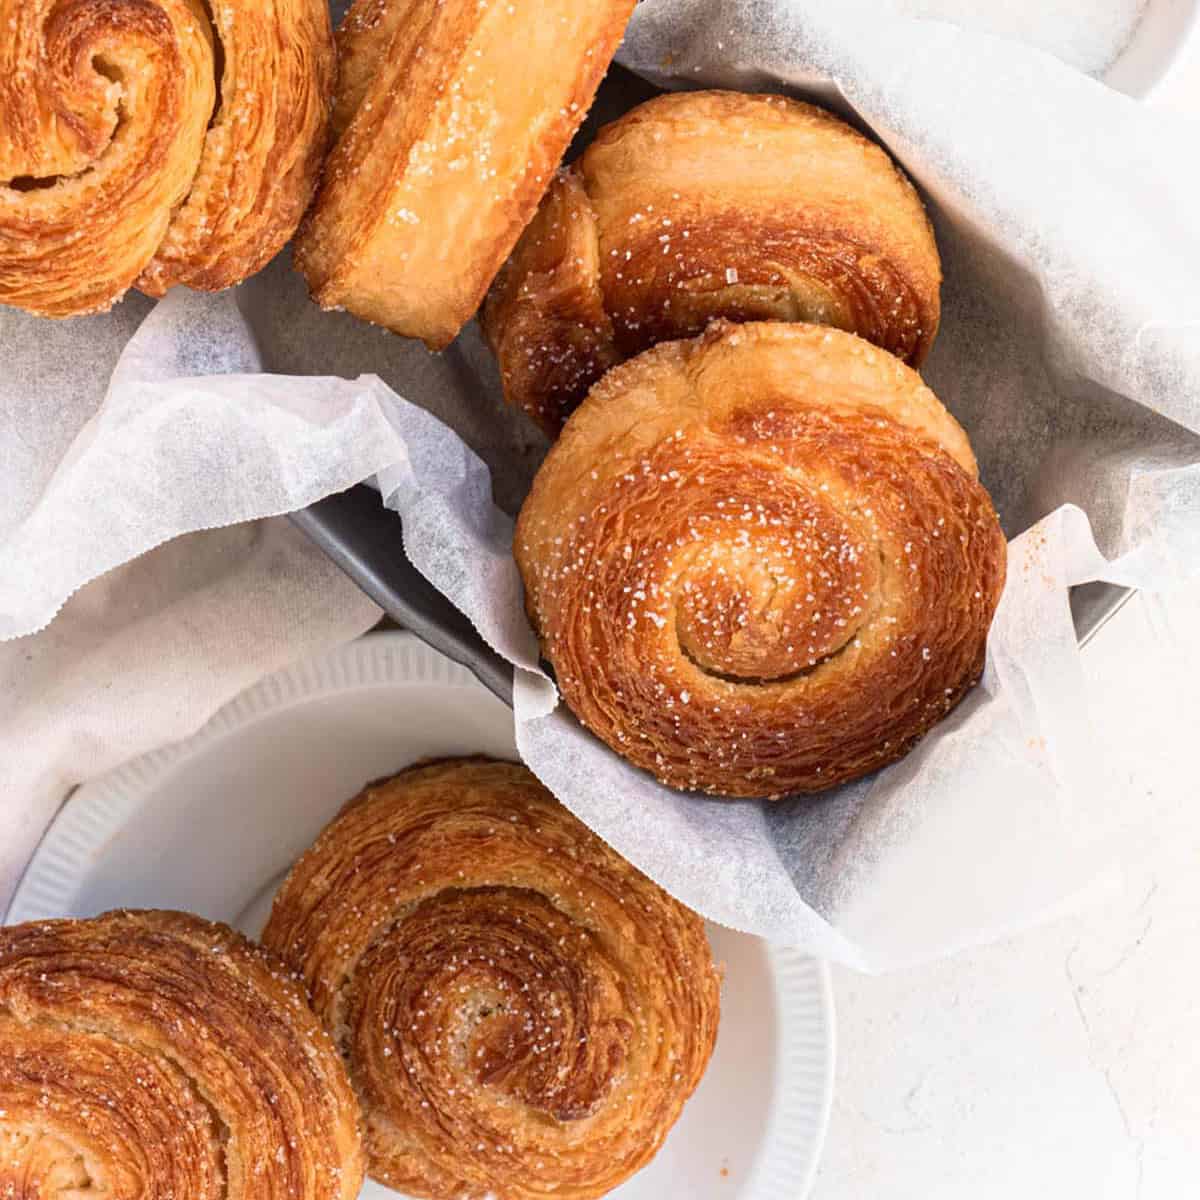 Kouign-amann are an indulgent crisp and flaky pastry made from layers of caramelised laminated dough